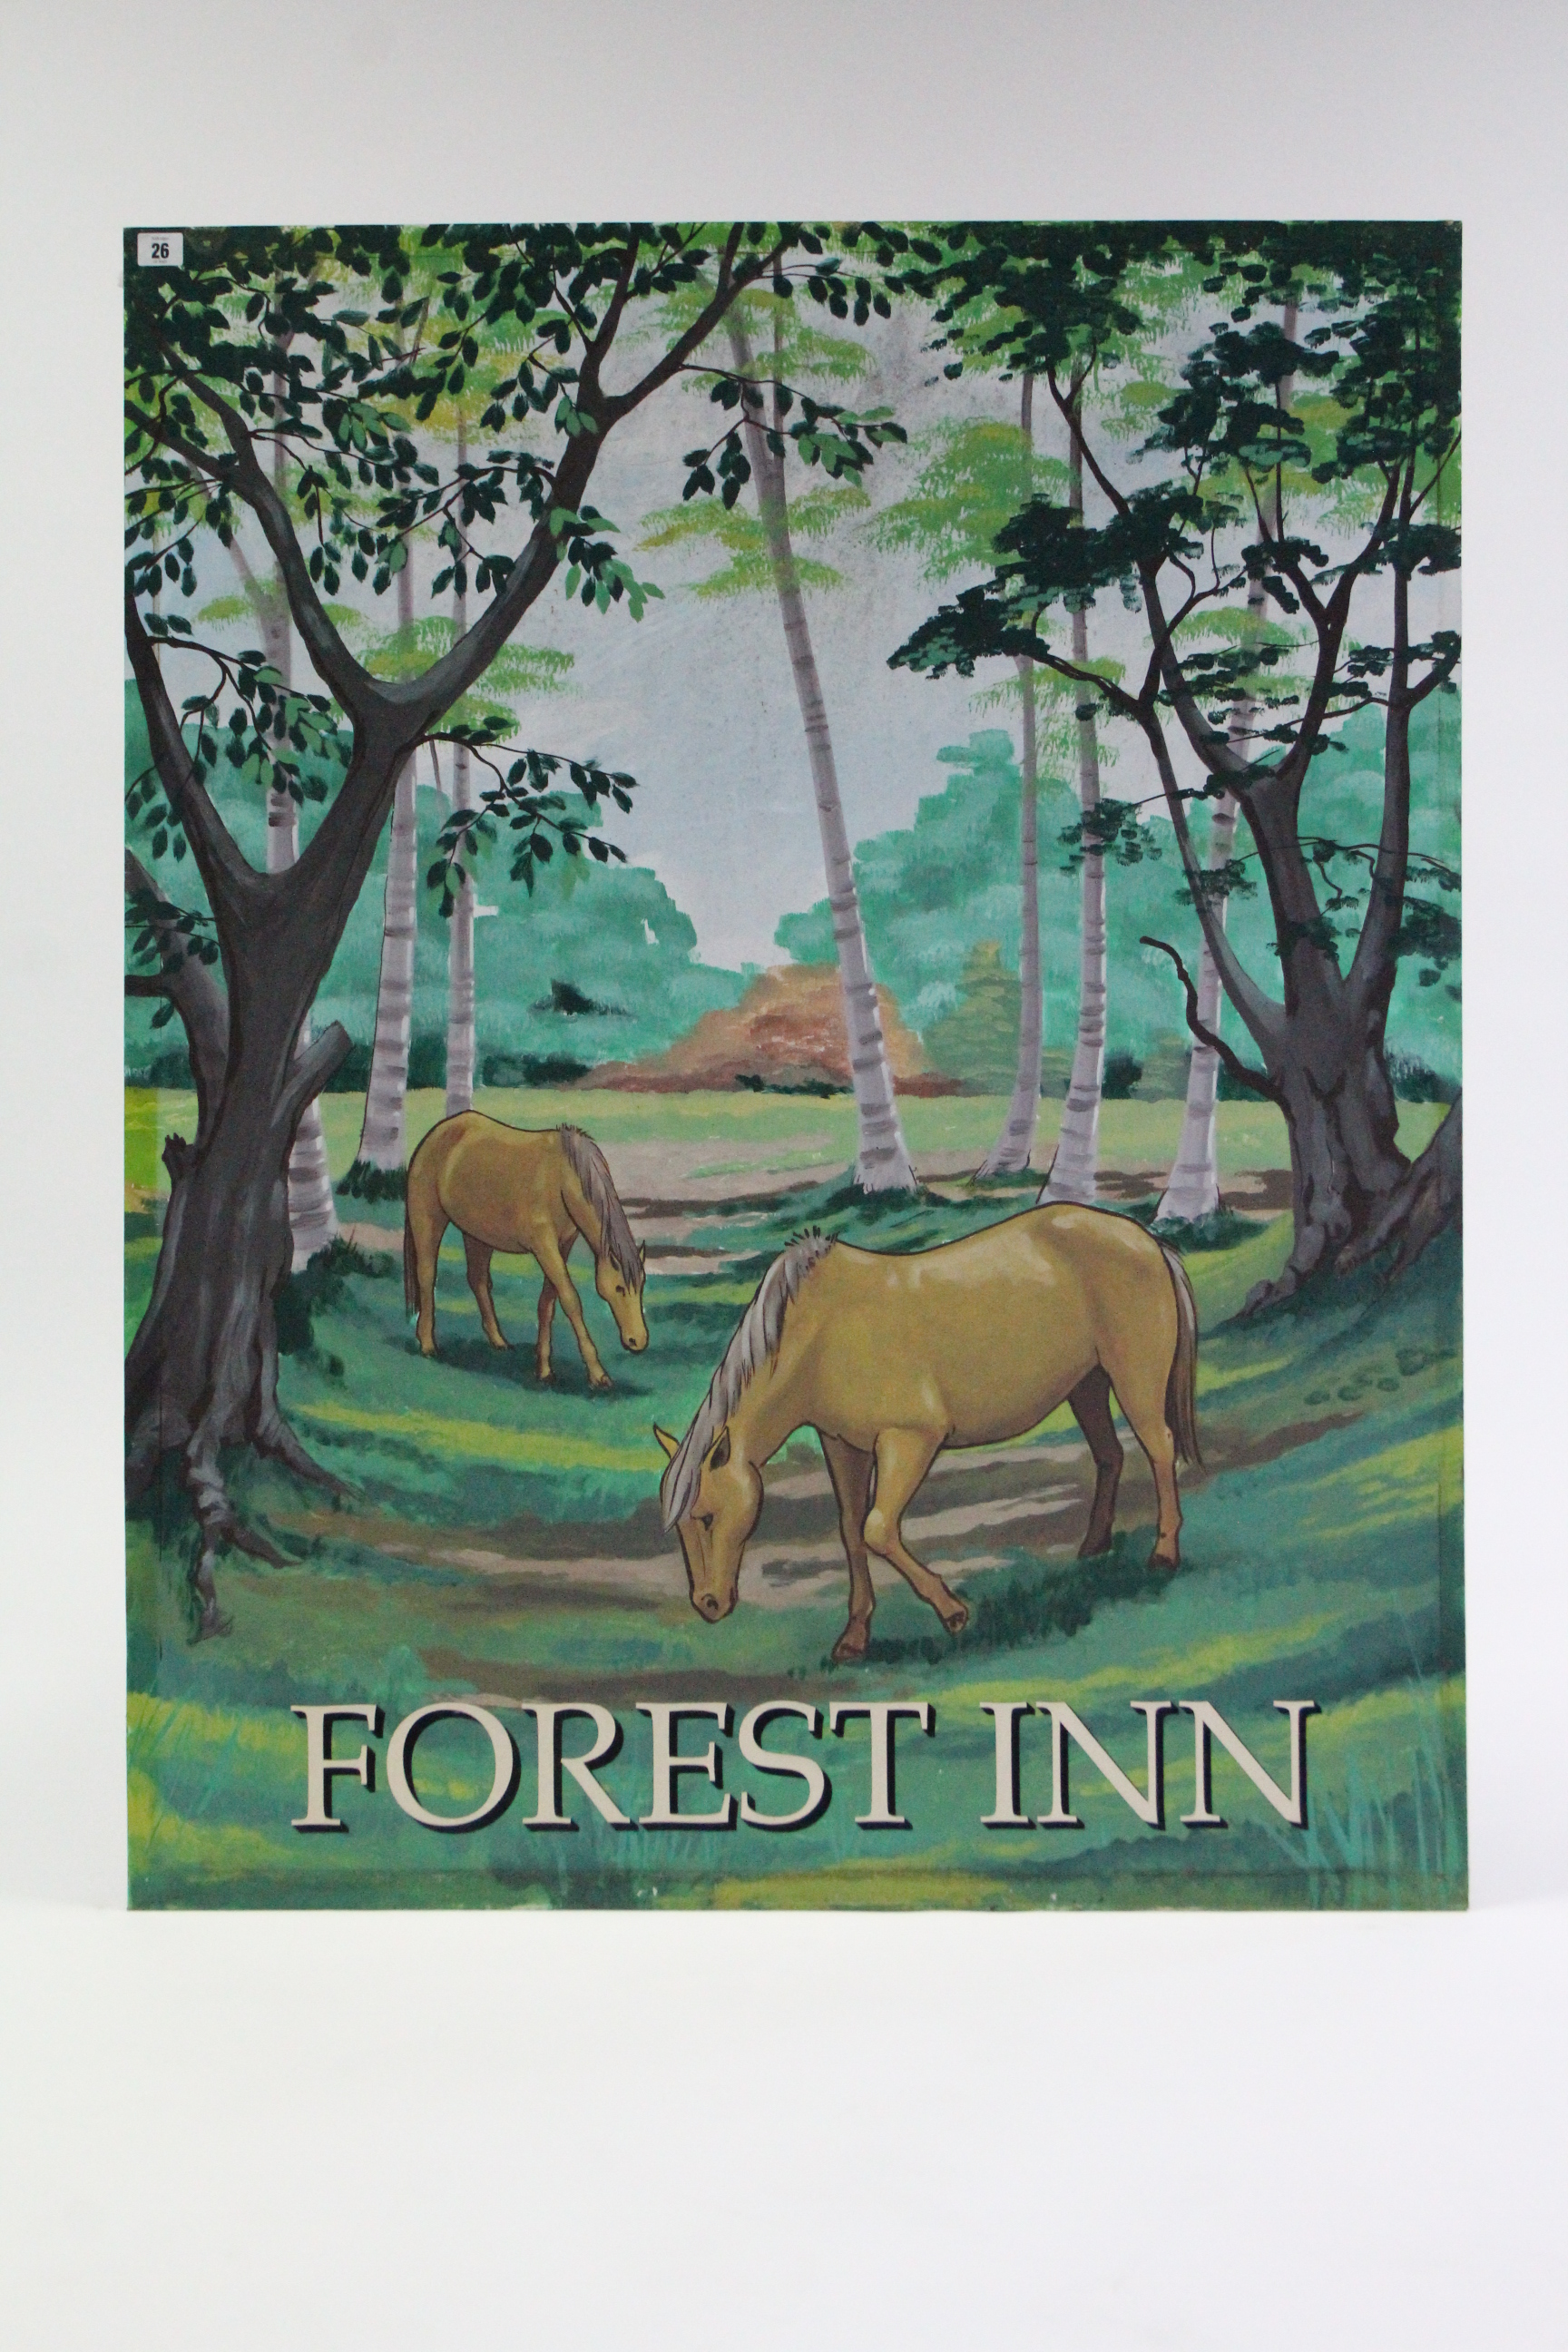 Two rectangular Inn signs “Forest Inn”, 45¼” x 36” & “The Milton Arms” 44¼” x 32”. - Image 2 of 2